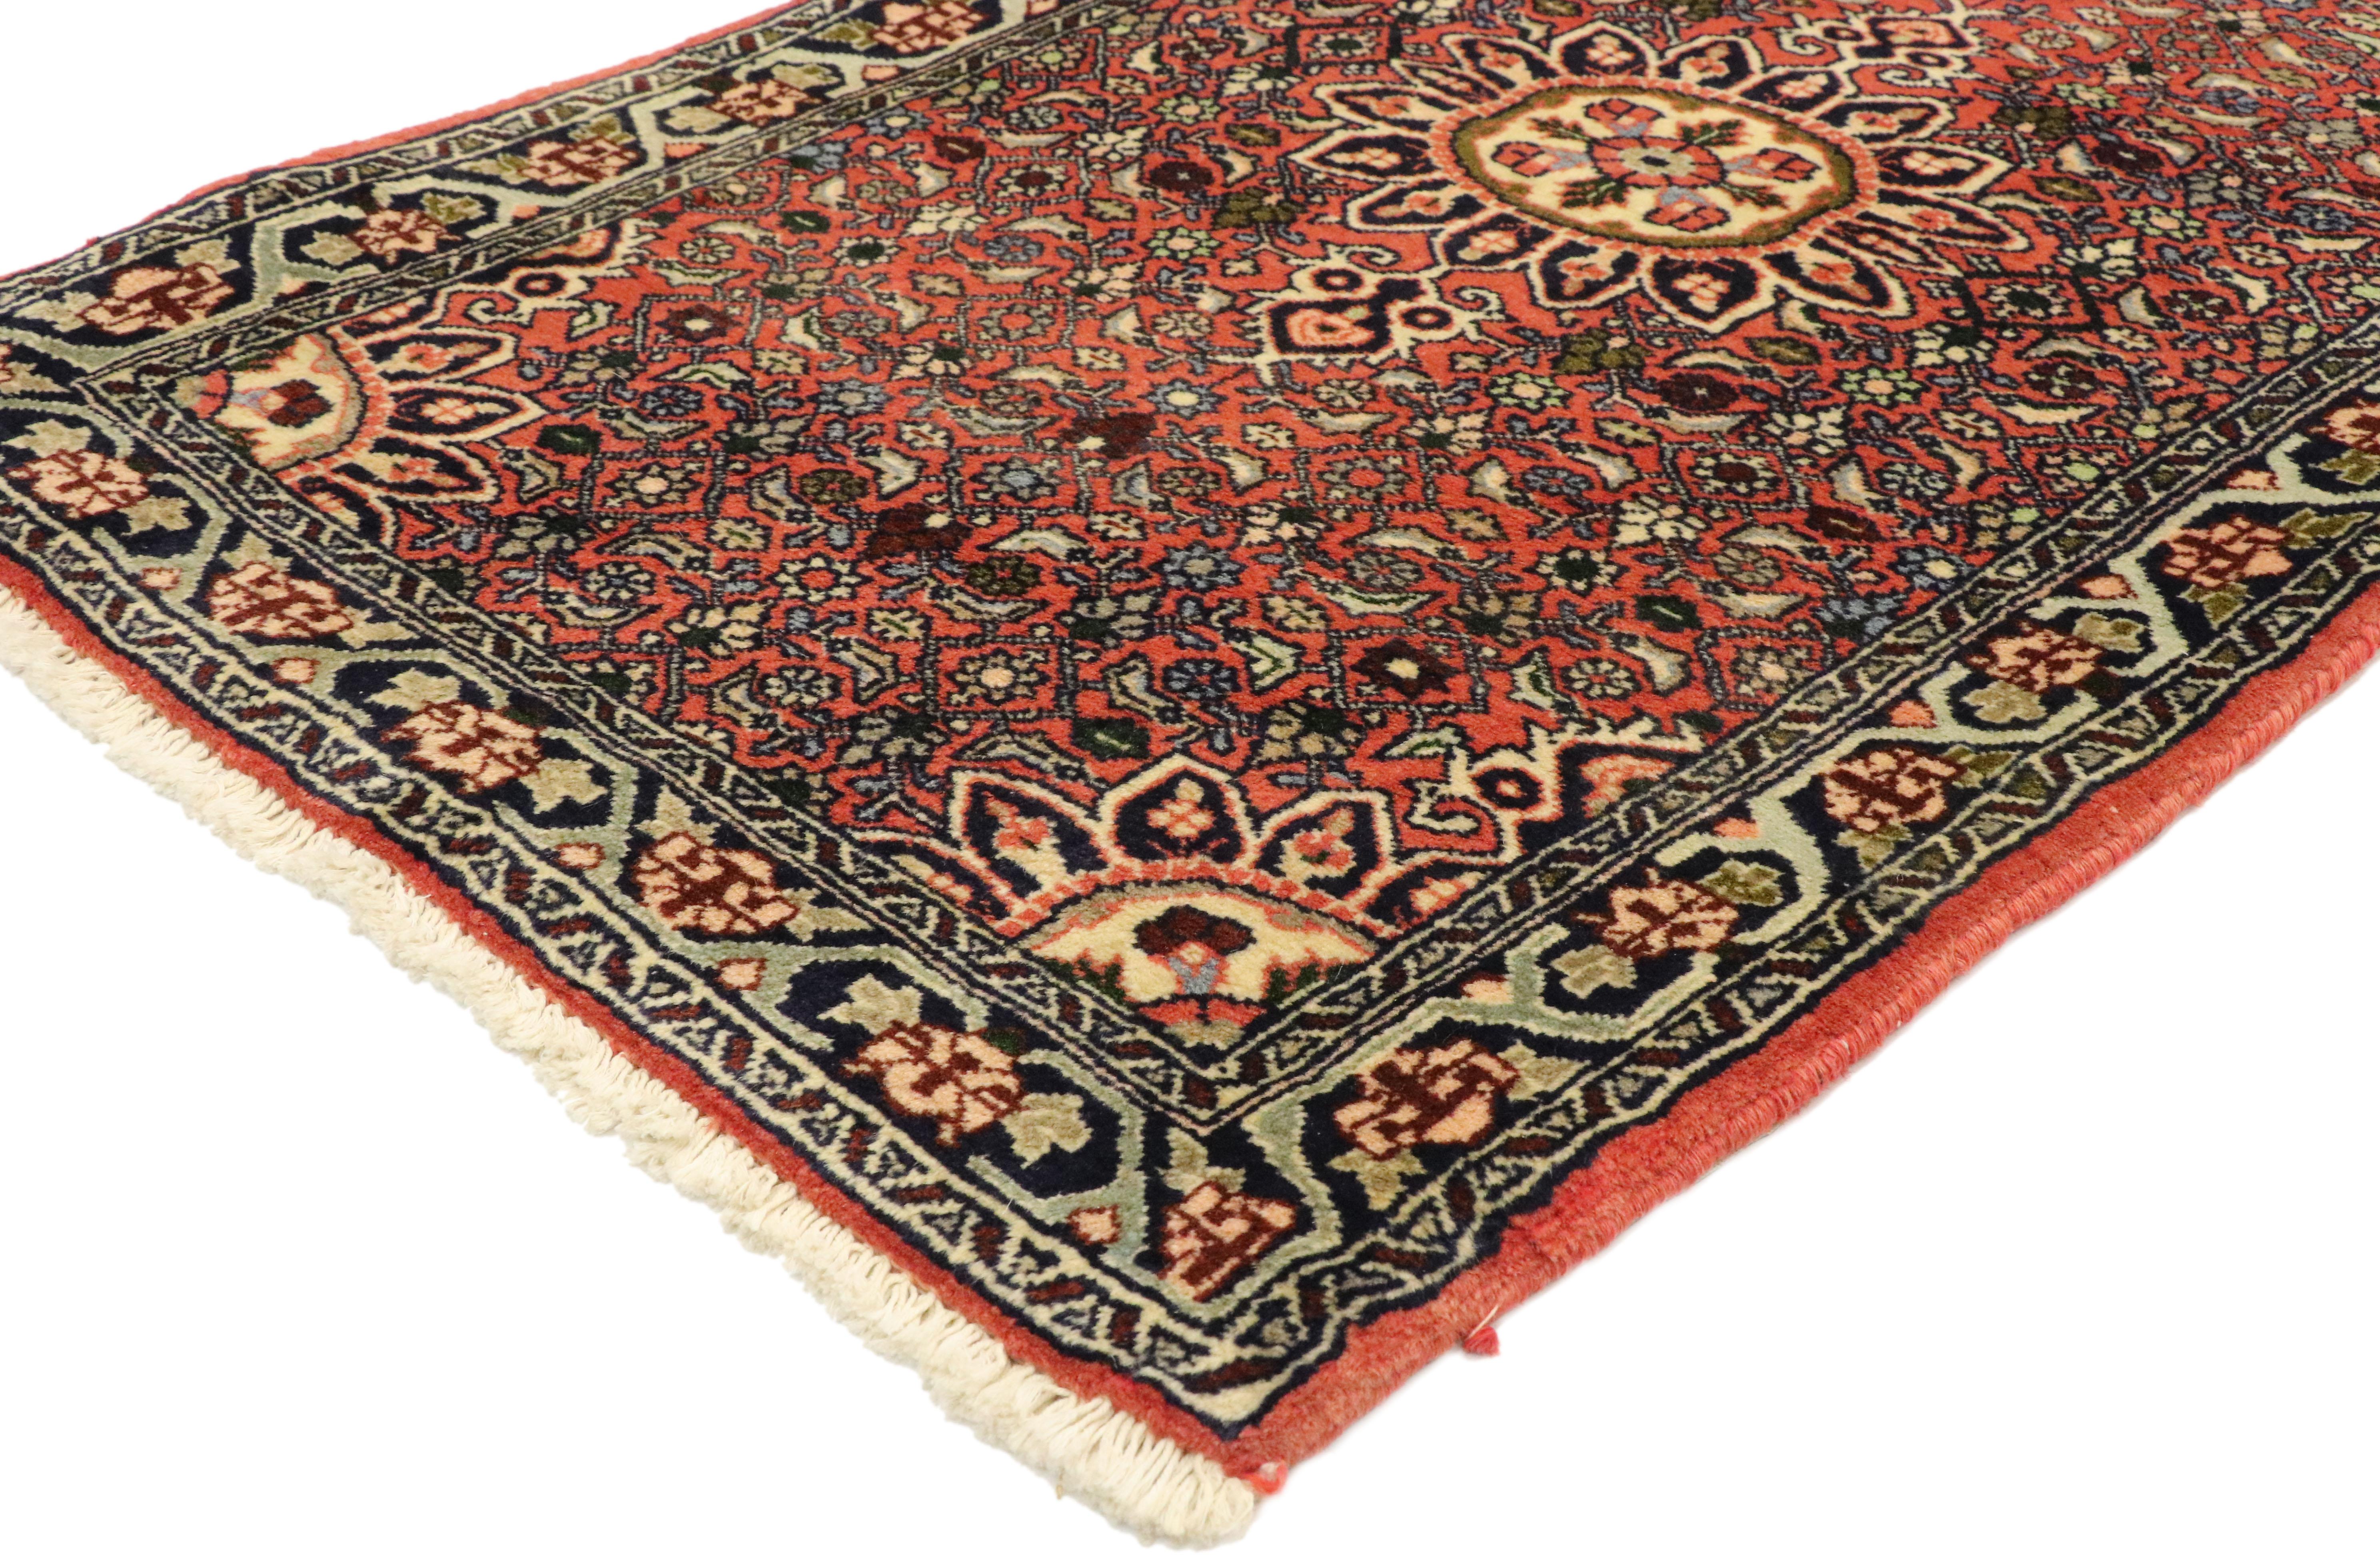 76054, vintage Persian Bijar Scatter rug with Traditional Modern style, accent rug. This Persian Bijar rug features a round floral medallion and bright, dense patterning throughout. A dainty pink floral border surrounds. Bijar rugs are versatile and